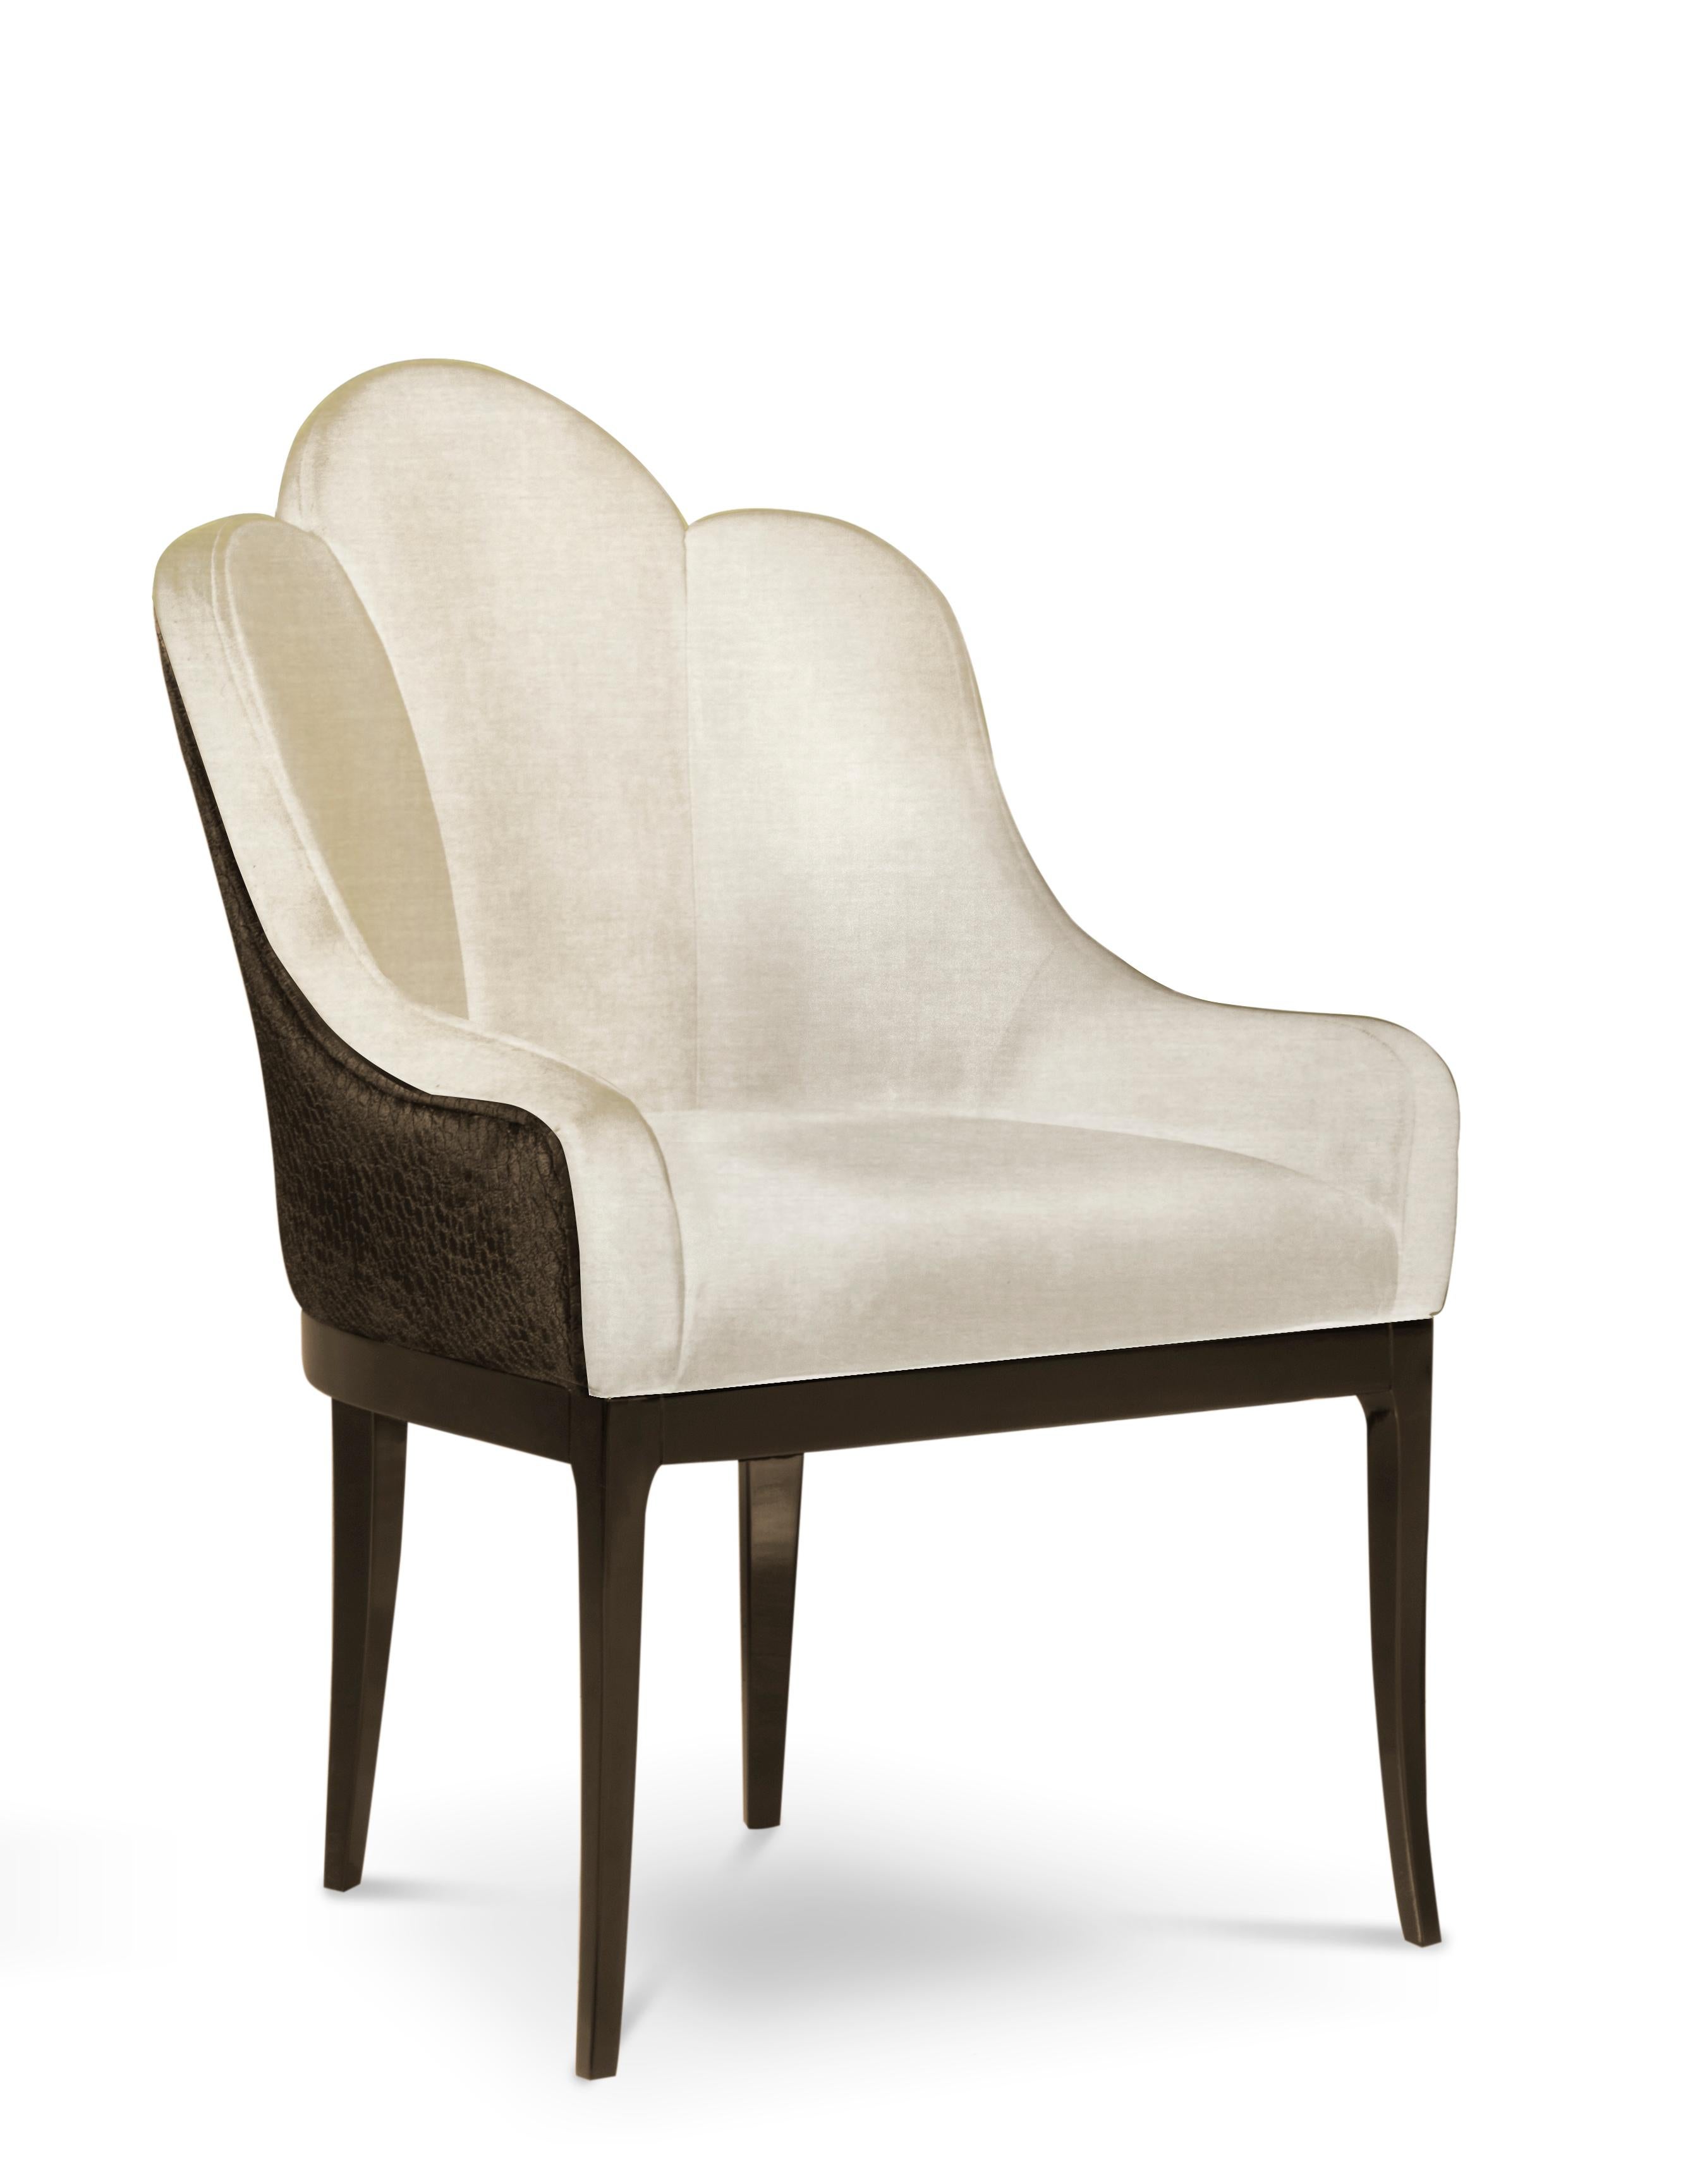 Portuguese Anastasia Dining Chair For Sale